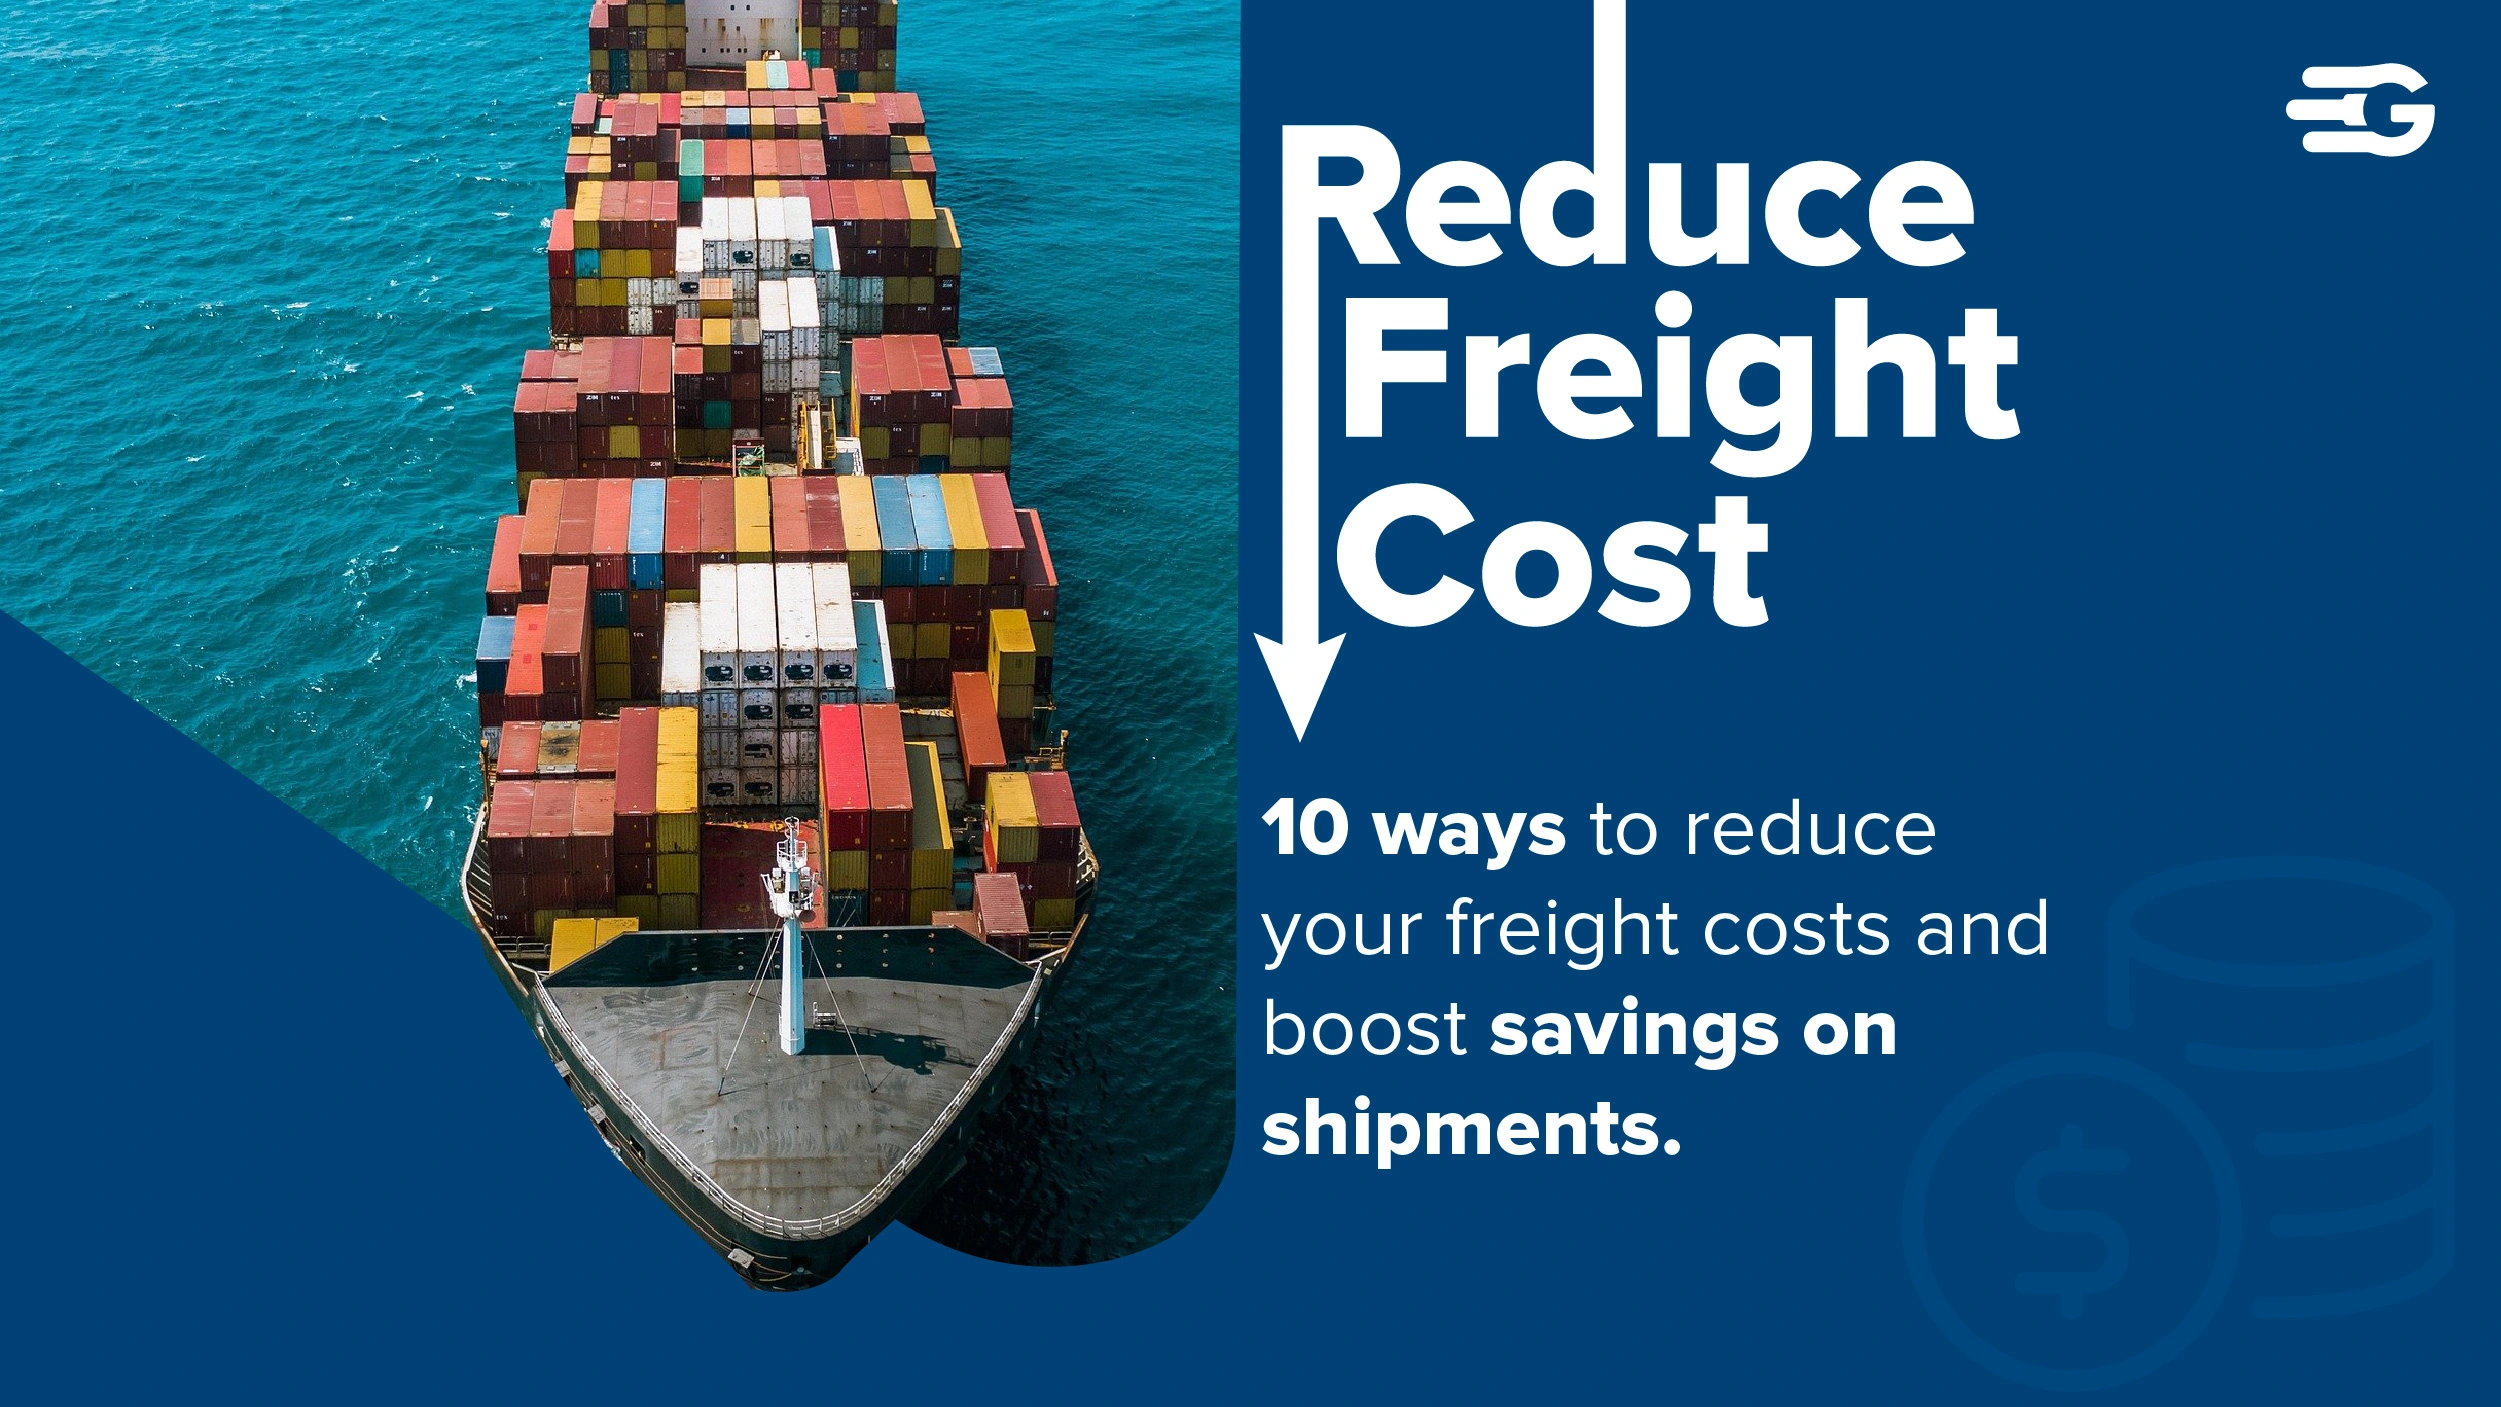 Reduce Freight Cost